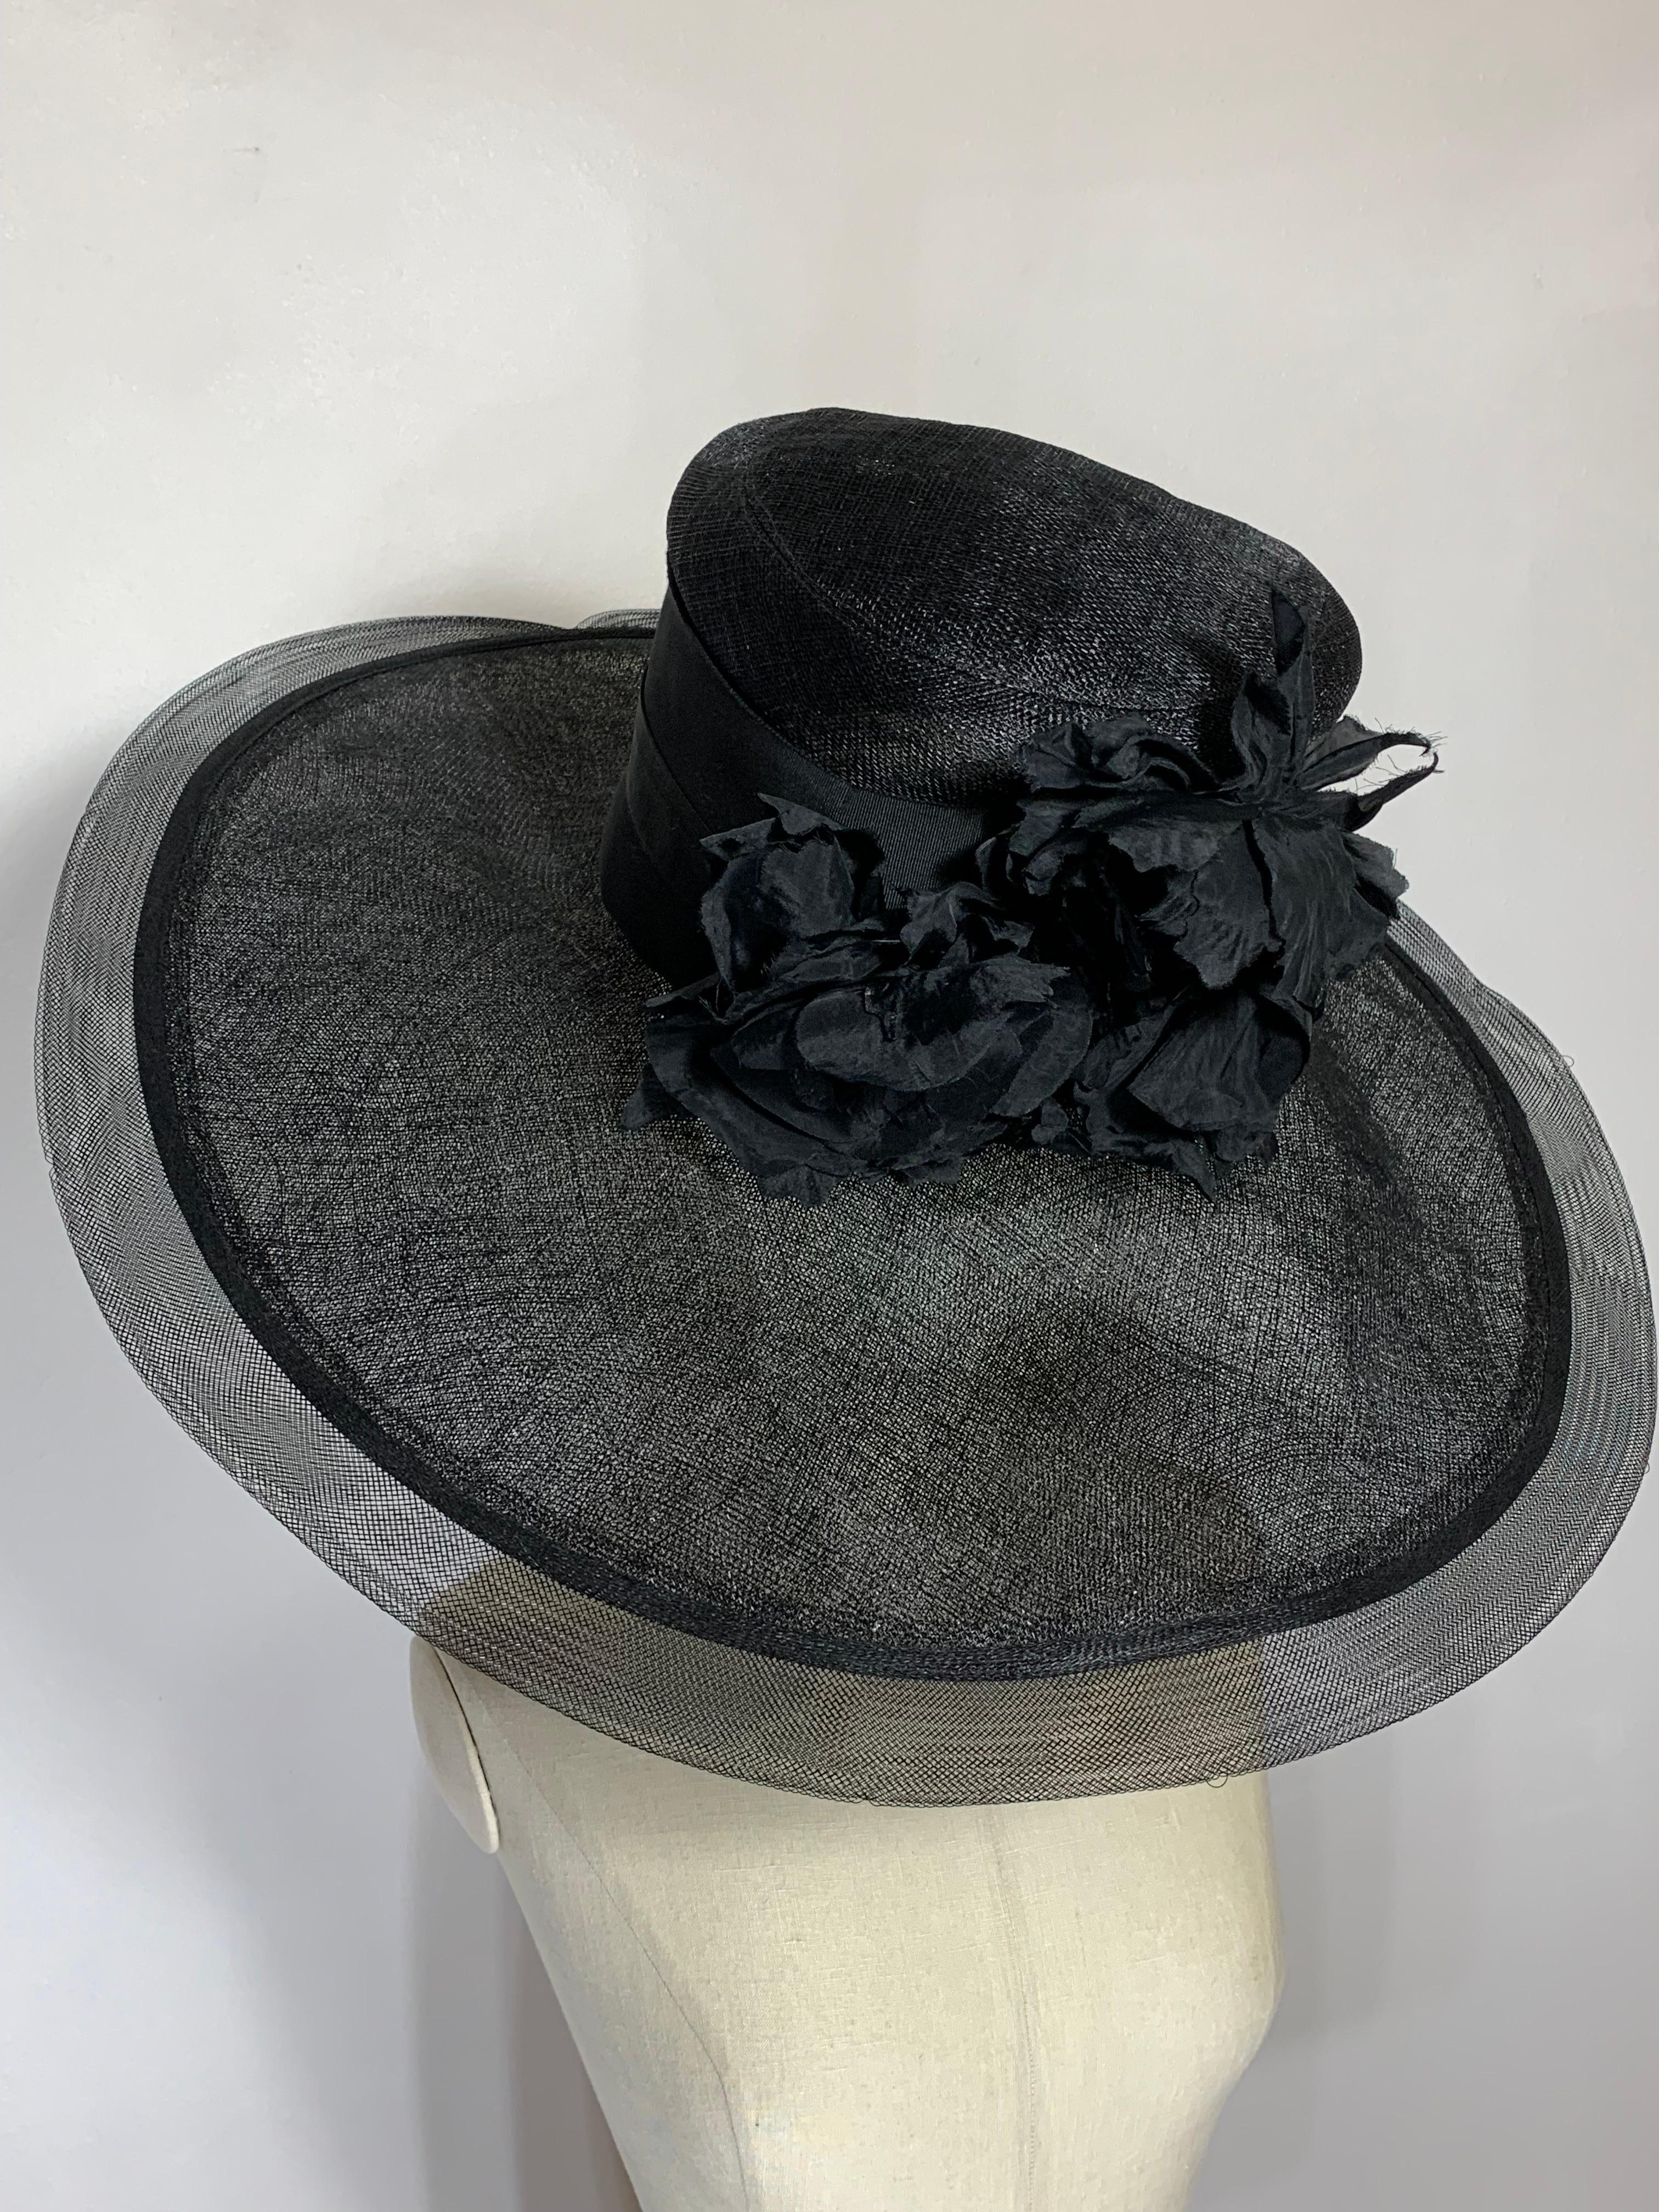 Maison Michel Spring/Summer Black Straw Wide Brim Hat w Horsehair Edge & Floral Bouquet at Front. Delicate Custom-made sheer straw brim measuring 21